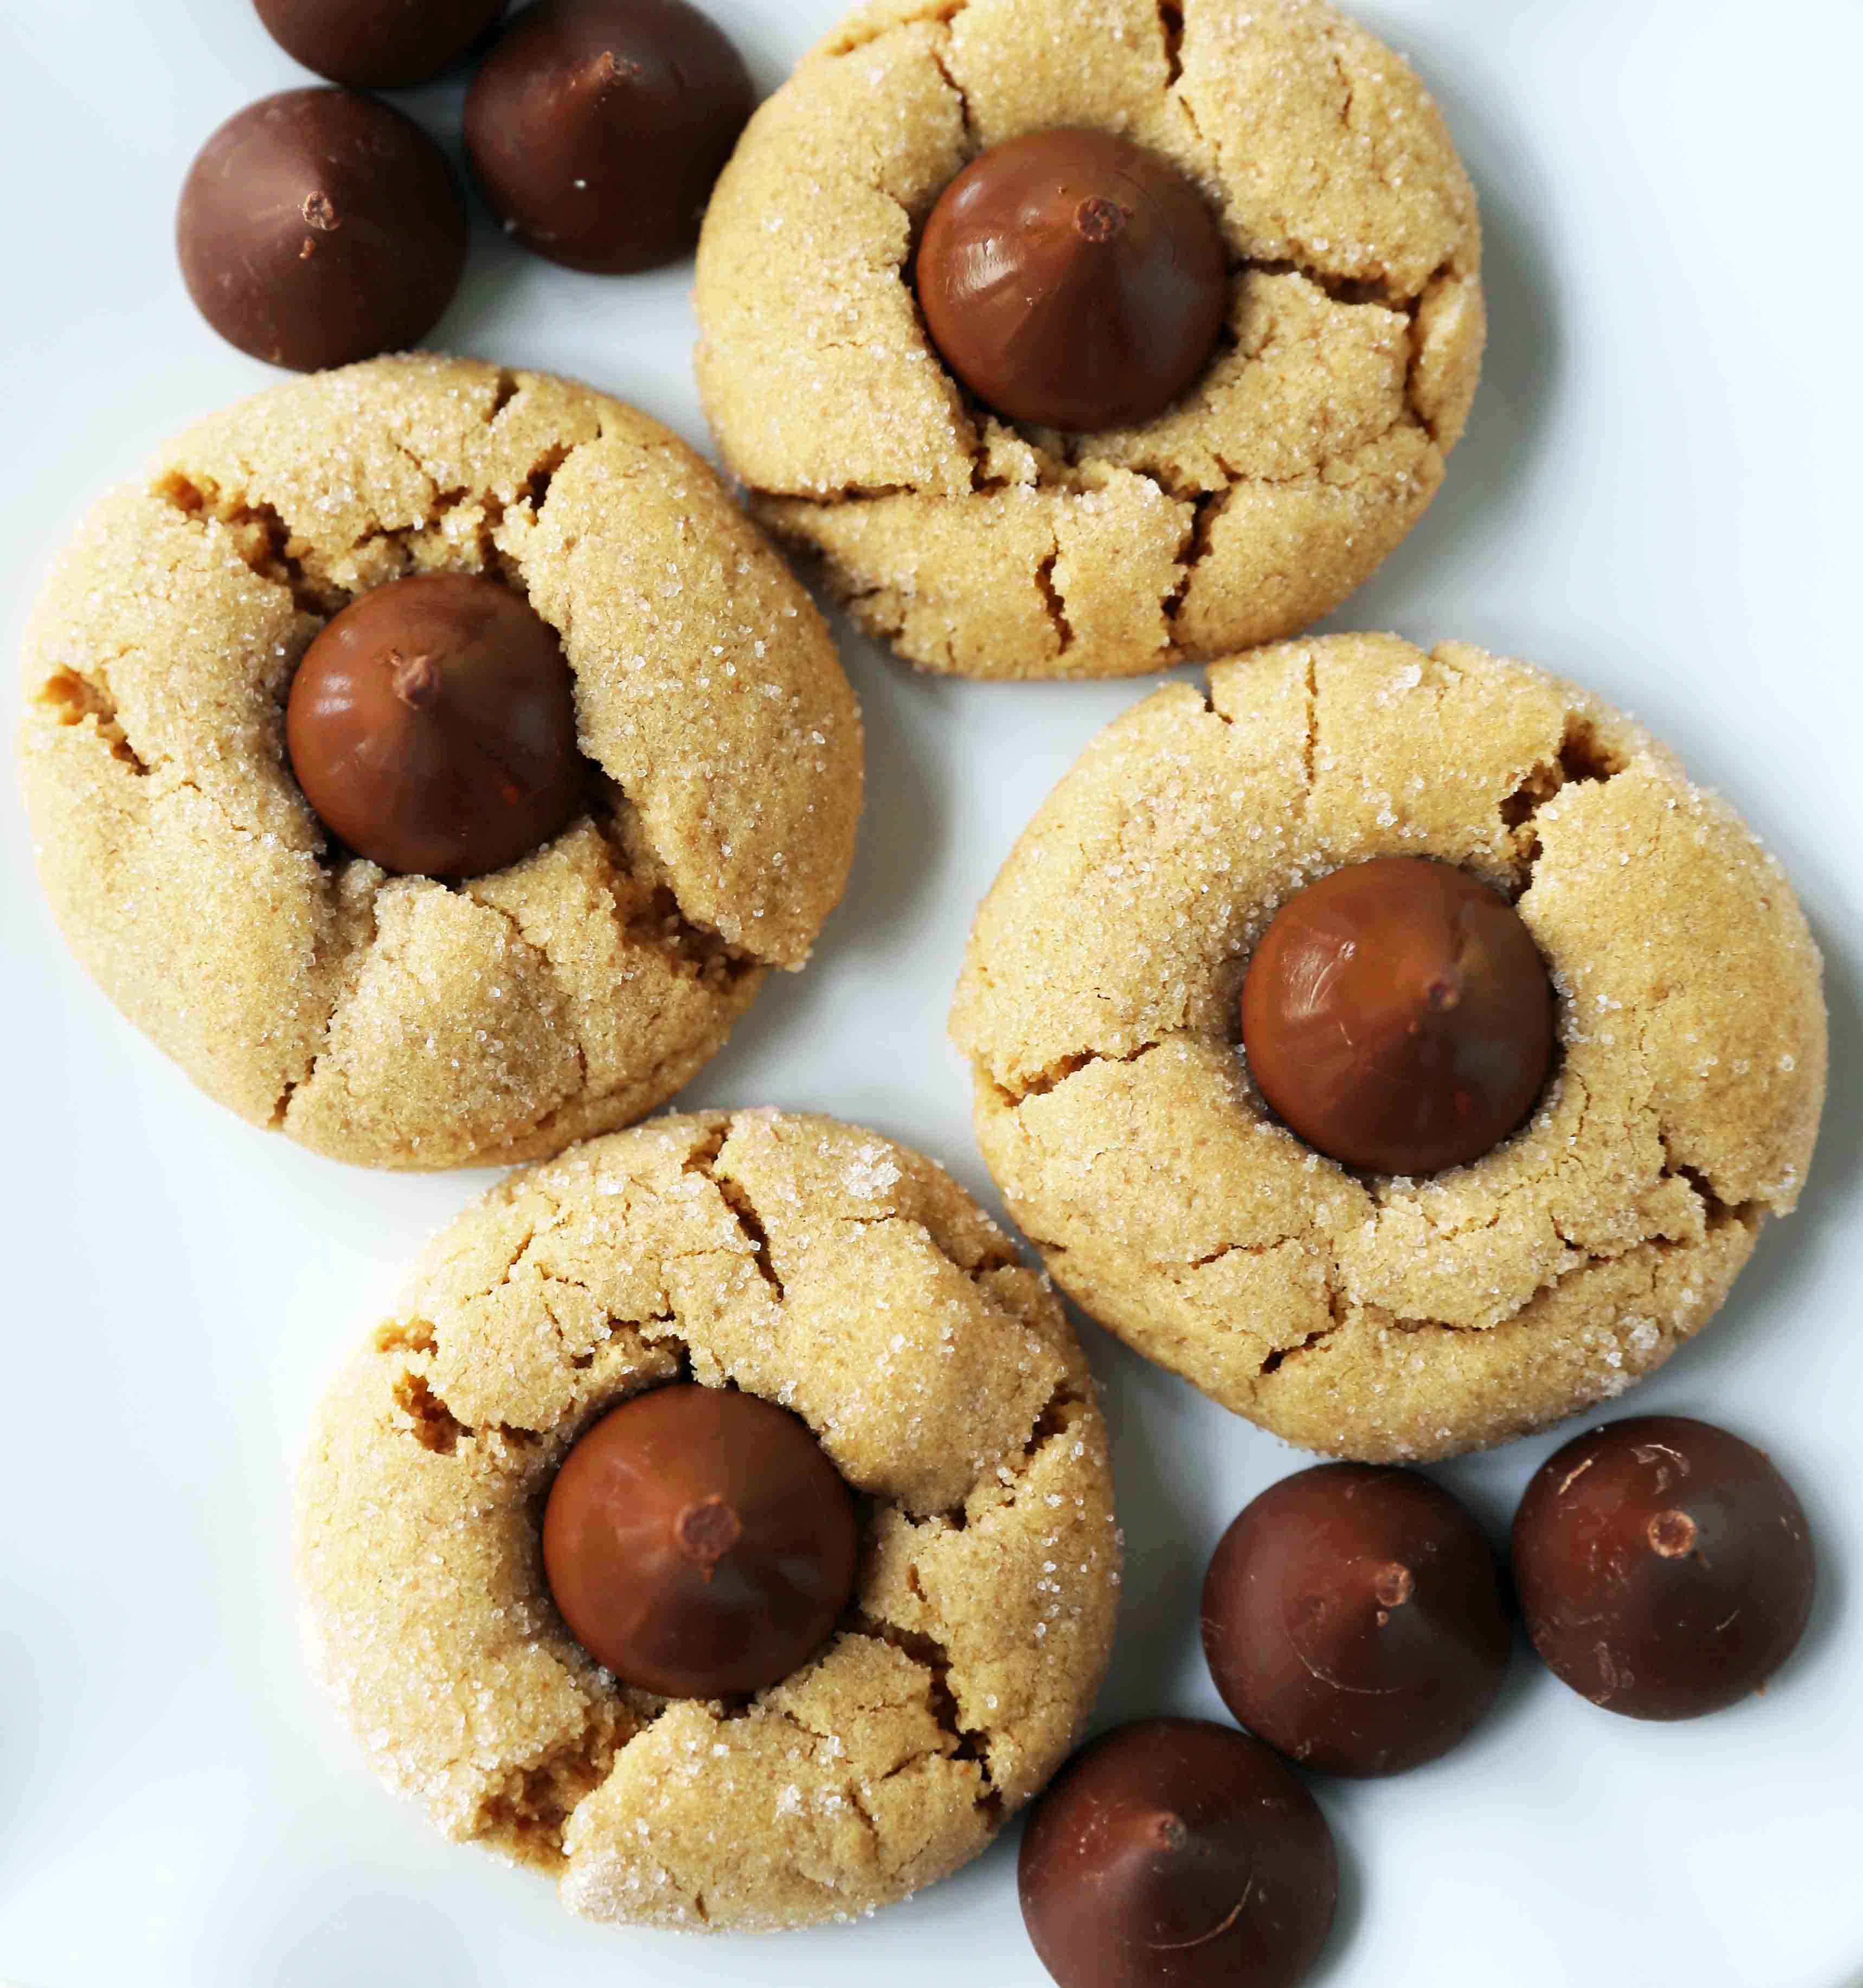 Peanut Butter Blossoms Cookies. Peanut Butter Chocolate Kiss Cookies are such a popular cookie recipe. Everyone loves these Kiss Cookies! www.modernhoney.com #chocolatepeanutbuttercookies #kisscookies #chocolatekisscookies #peanutbuttercookies #christmascookies